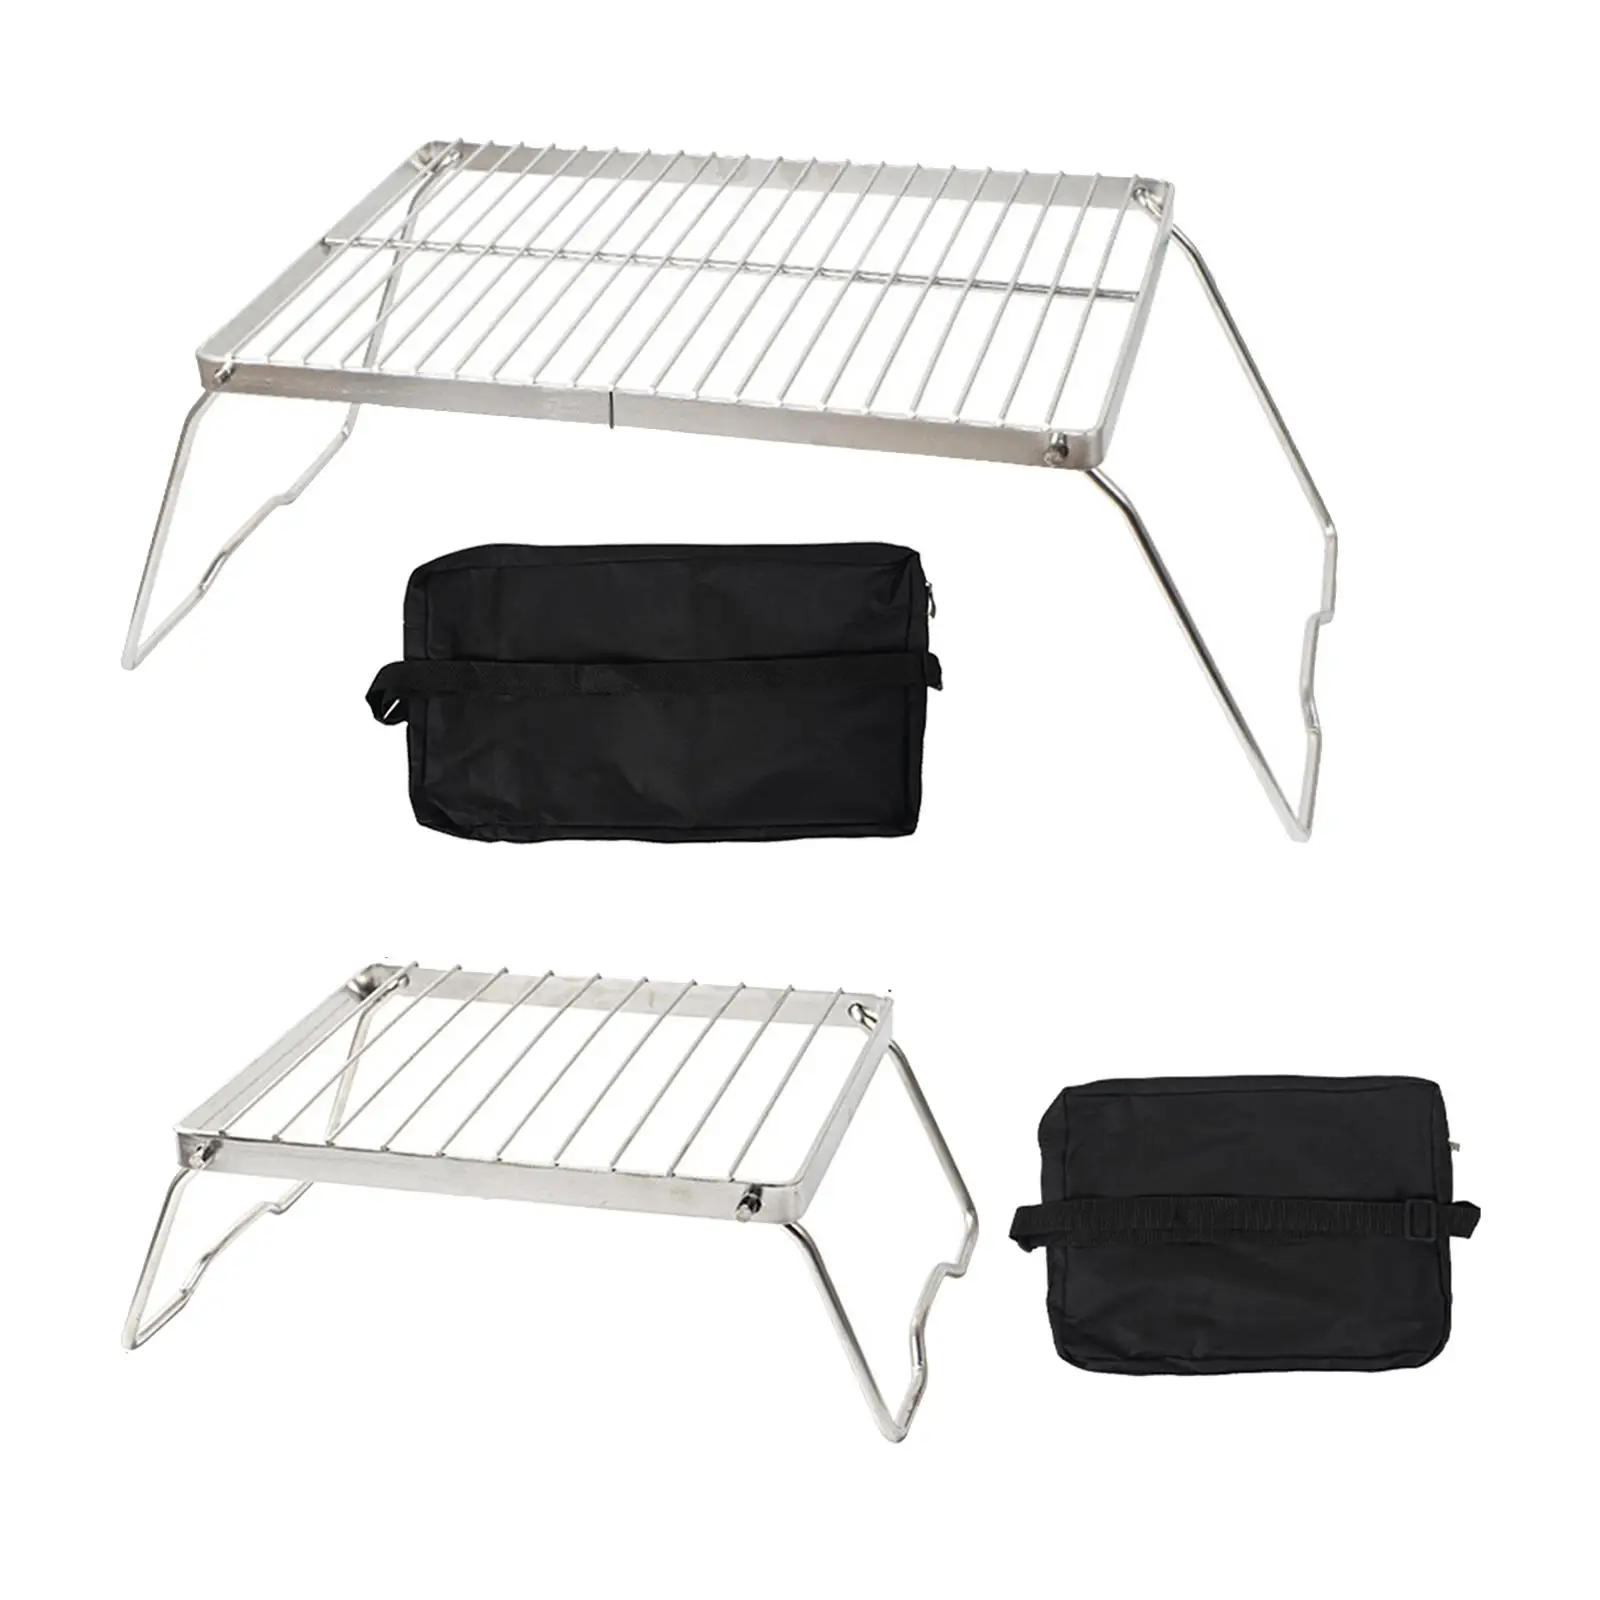 Camping Grill Grate Stainless Steel Multifunctional Portable Folding Grill Rack Gas Stoves Burner Bracket for Camping Home